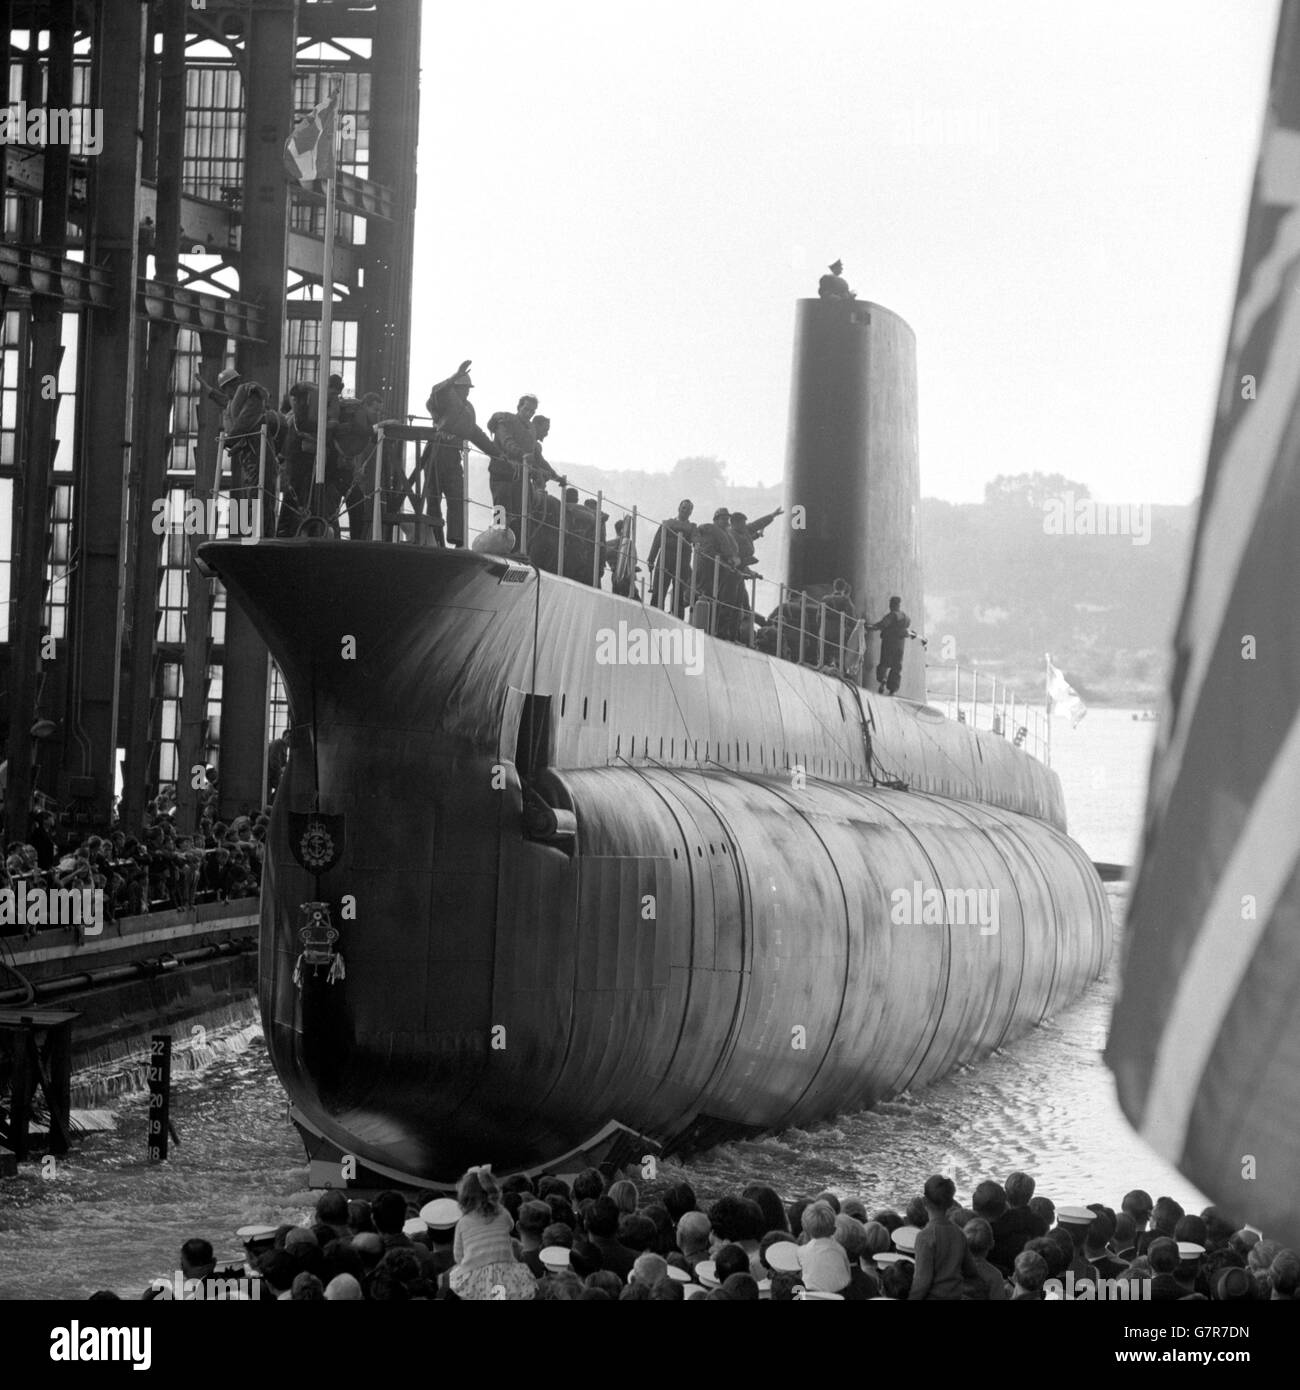 The oberon class submarine Okanagan, built for the Royal Canadian Navy, enters the water at her launch from Chatham Dockyard, Kent. She was named by Madame Cadieux, wife of the Associate Minister of National Defence for Canada. Okanagan is the third and last of the present series of Oberon class submarines built for Canada. She will be ready for service in about a year. Stock Photo